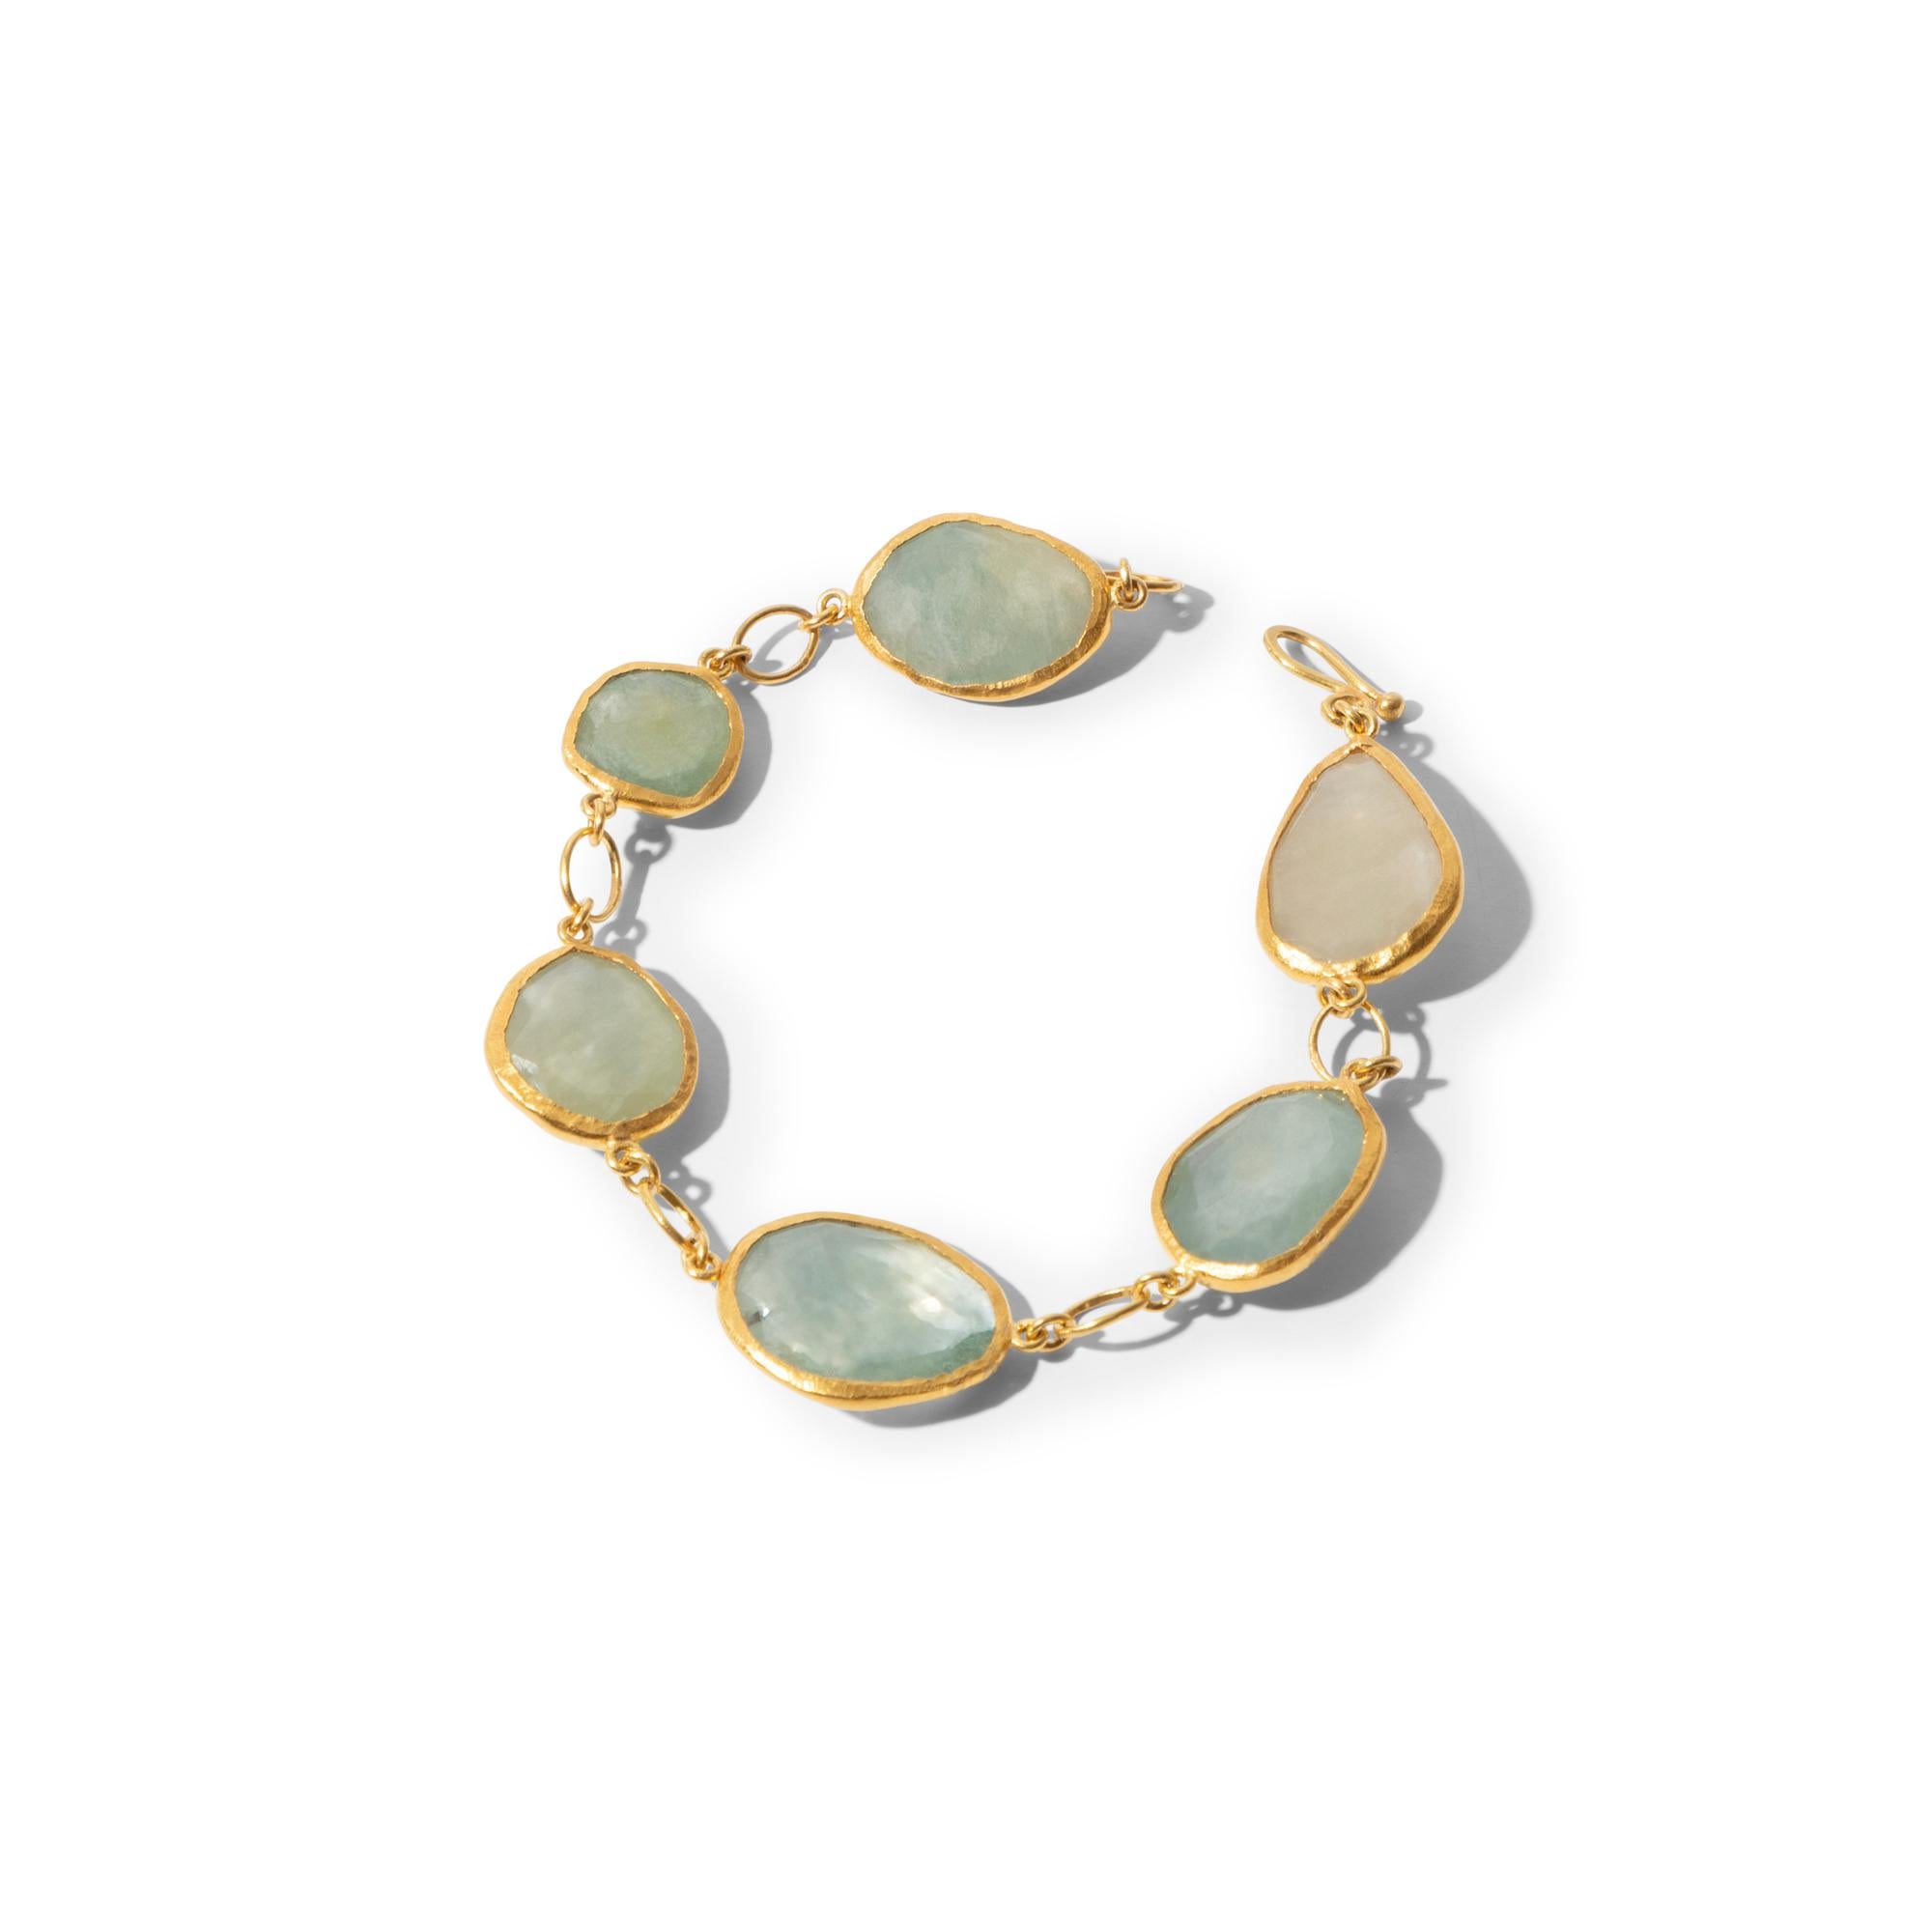 This supremely elegant one-of-a-kind bracelet was completely handcrafted with green random cut sapphires enhanced by a rim of 24k pure gold connected by 22k gold links. It is a timeless piece that will add a touch of bohemian elegance to your